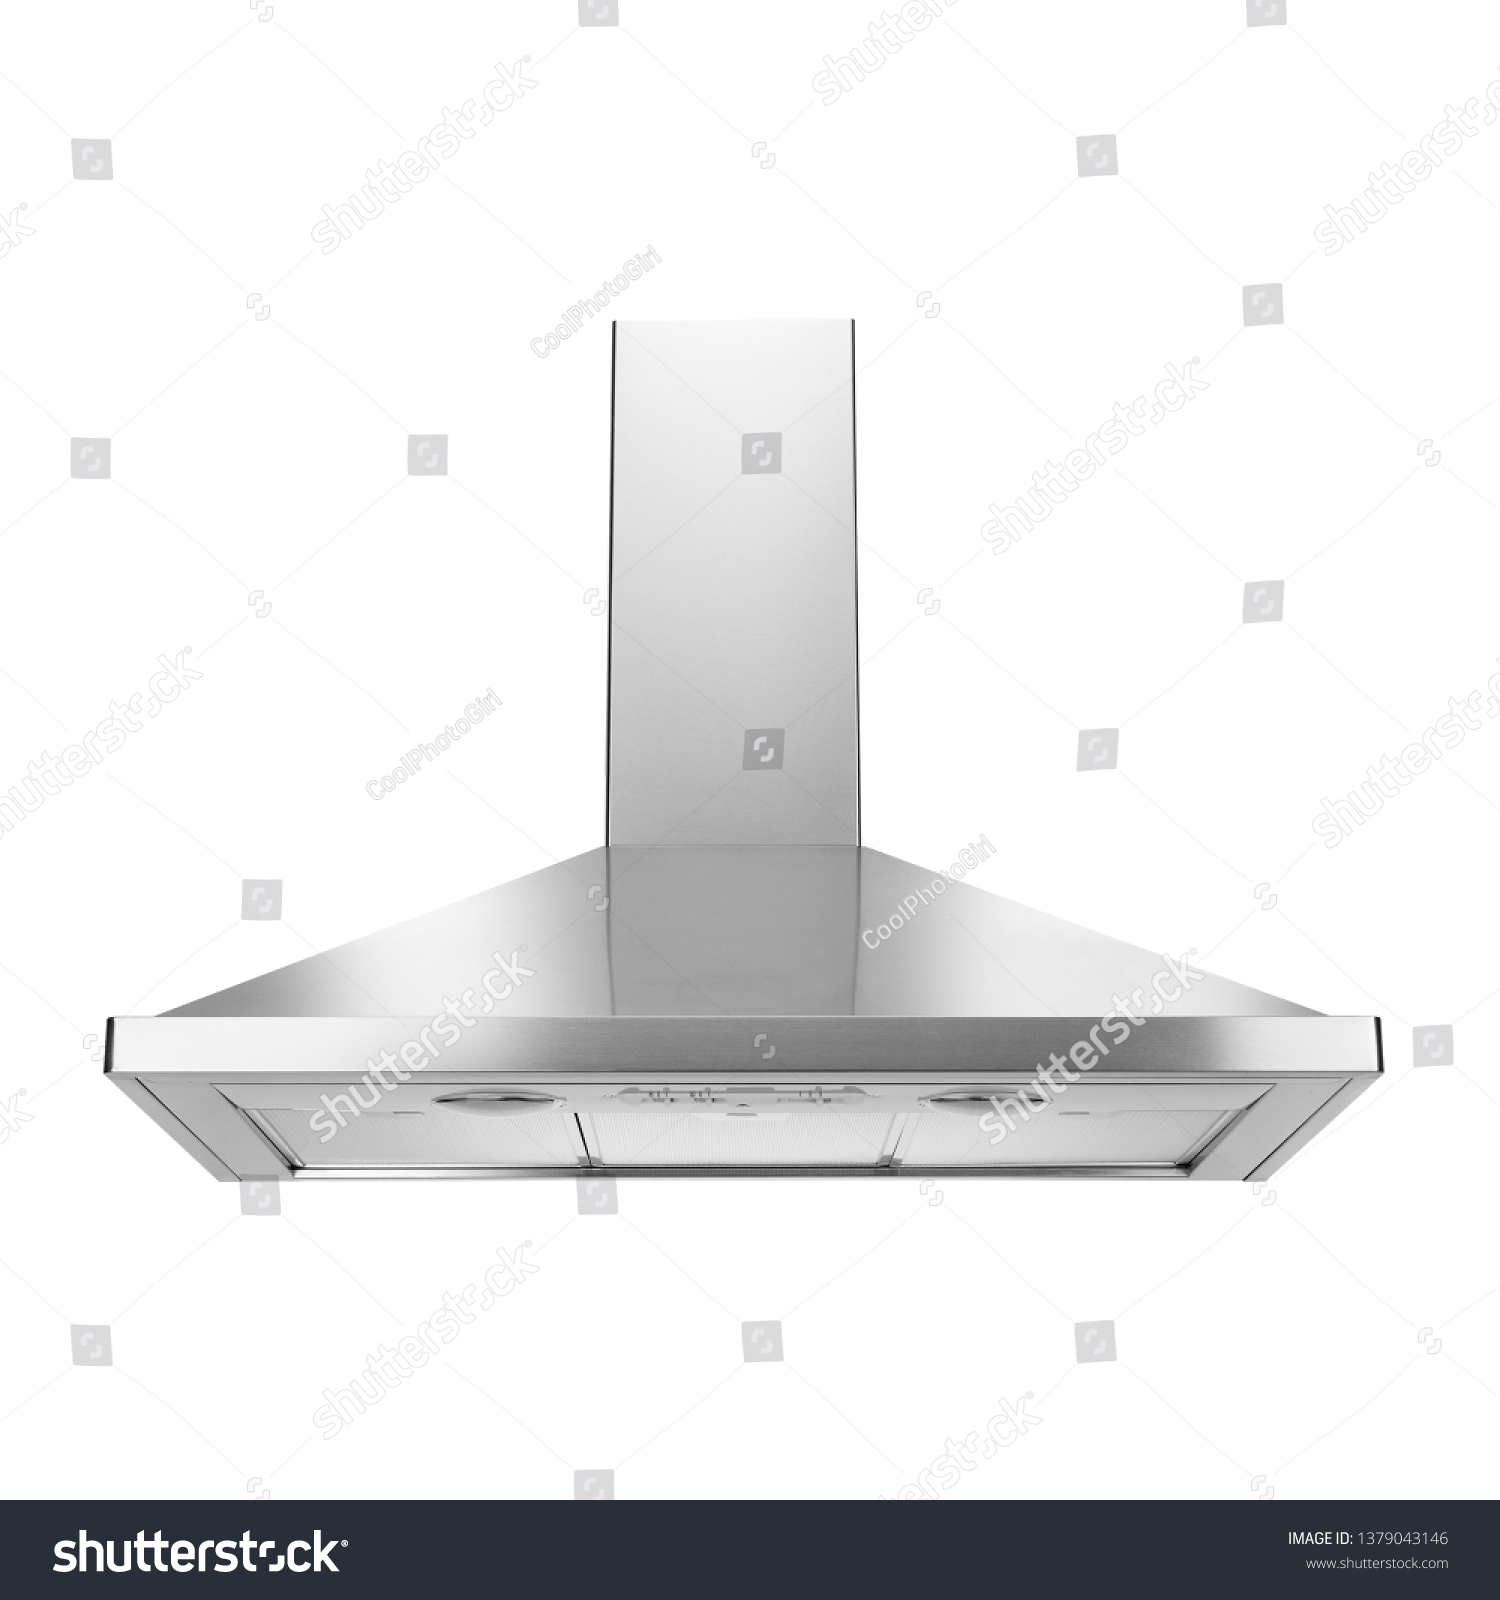 Range Hood Isolated on White Background. Cooking Canopy. Stainless Steel Fume Extractor. Island Ventilation.  Front View of Electric Chimney. Kitchen and Domestic Major Appliances #1379043146